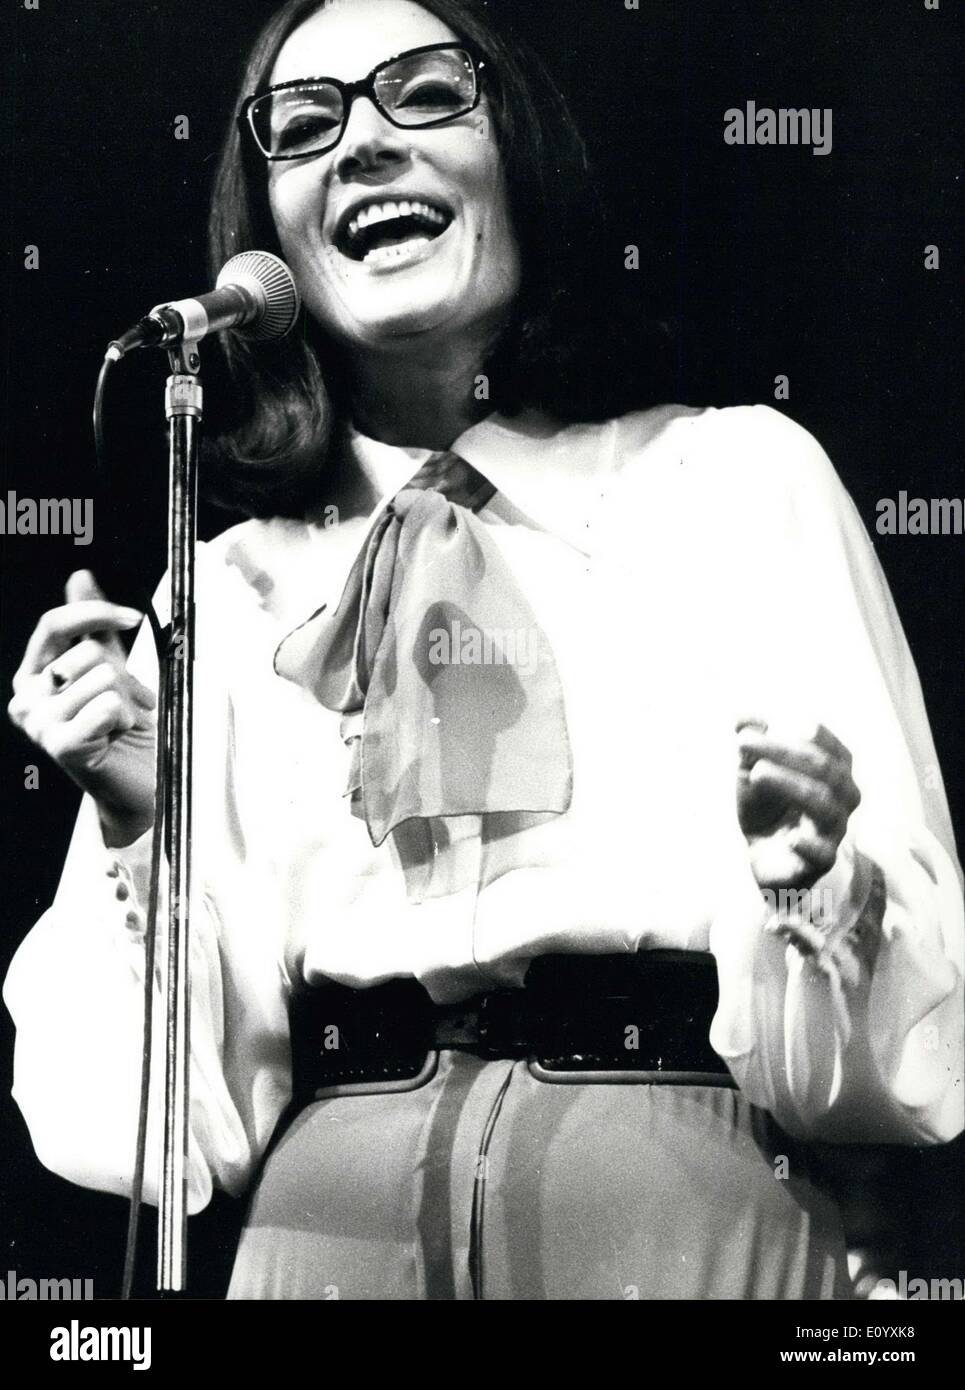 Oct. 08, 1971 - The pretty Greek singer Nana Mouskouri made her comeback last night at the Olympia. Accompanied by the famous musicians ''The Athenians,'' who are directed by her husband, Nana Mouskouri's performance was a great success. Stock Photo